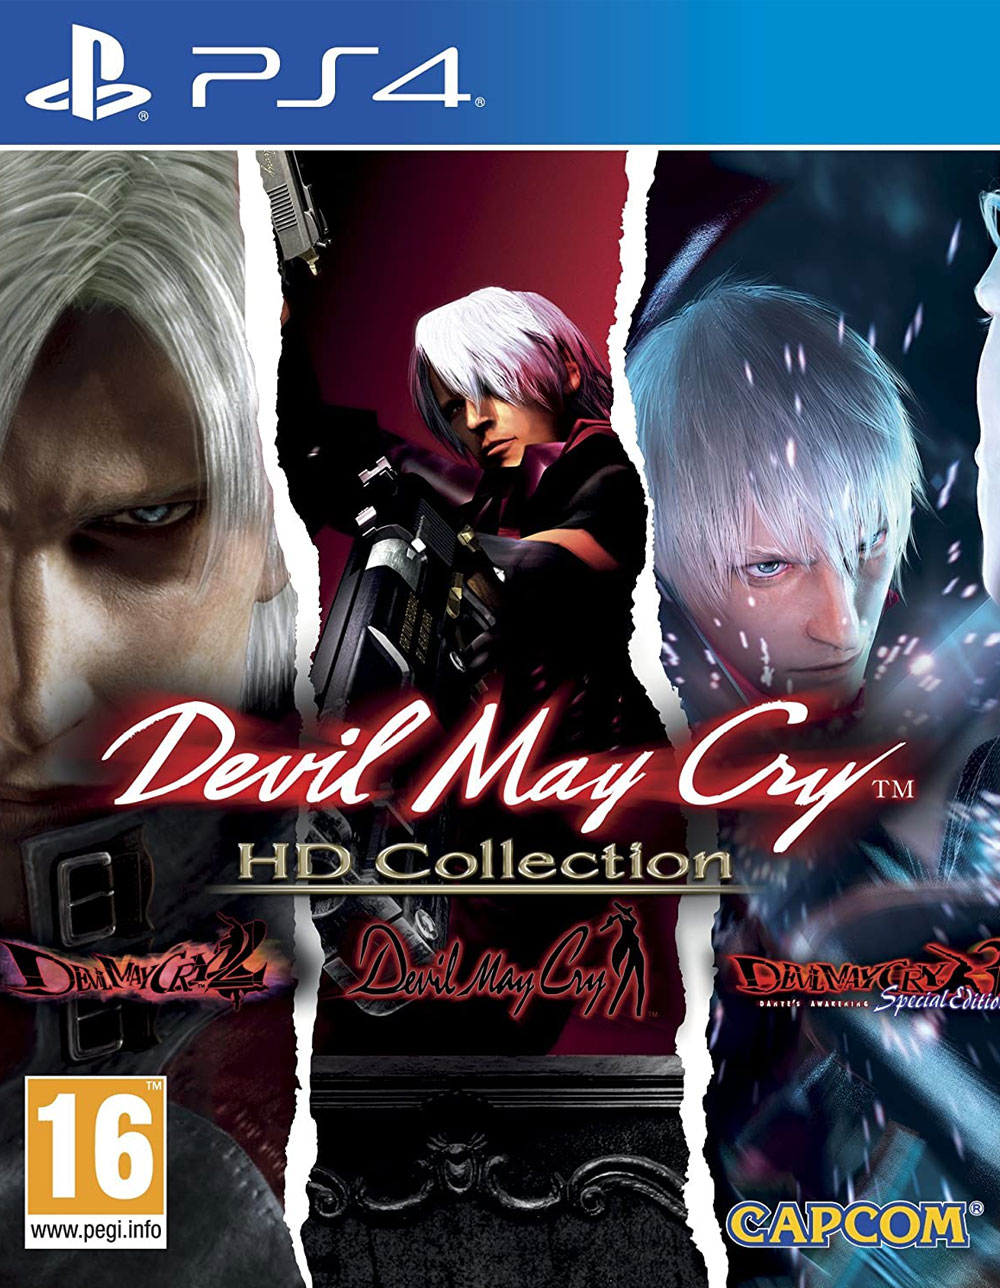 Devil May Cry HD collection,